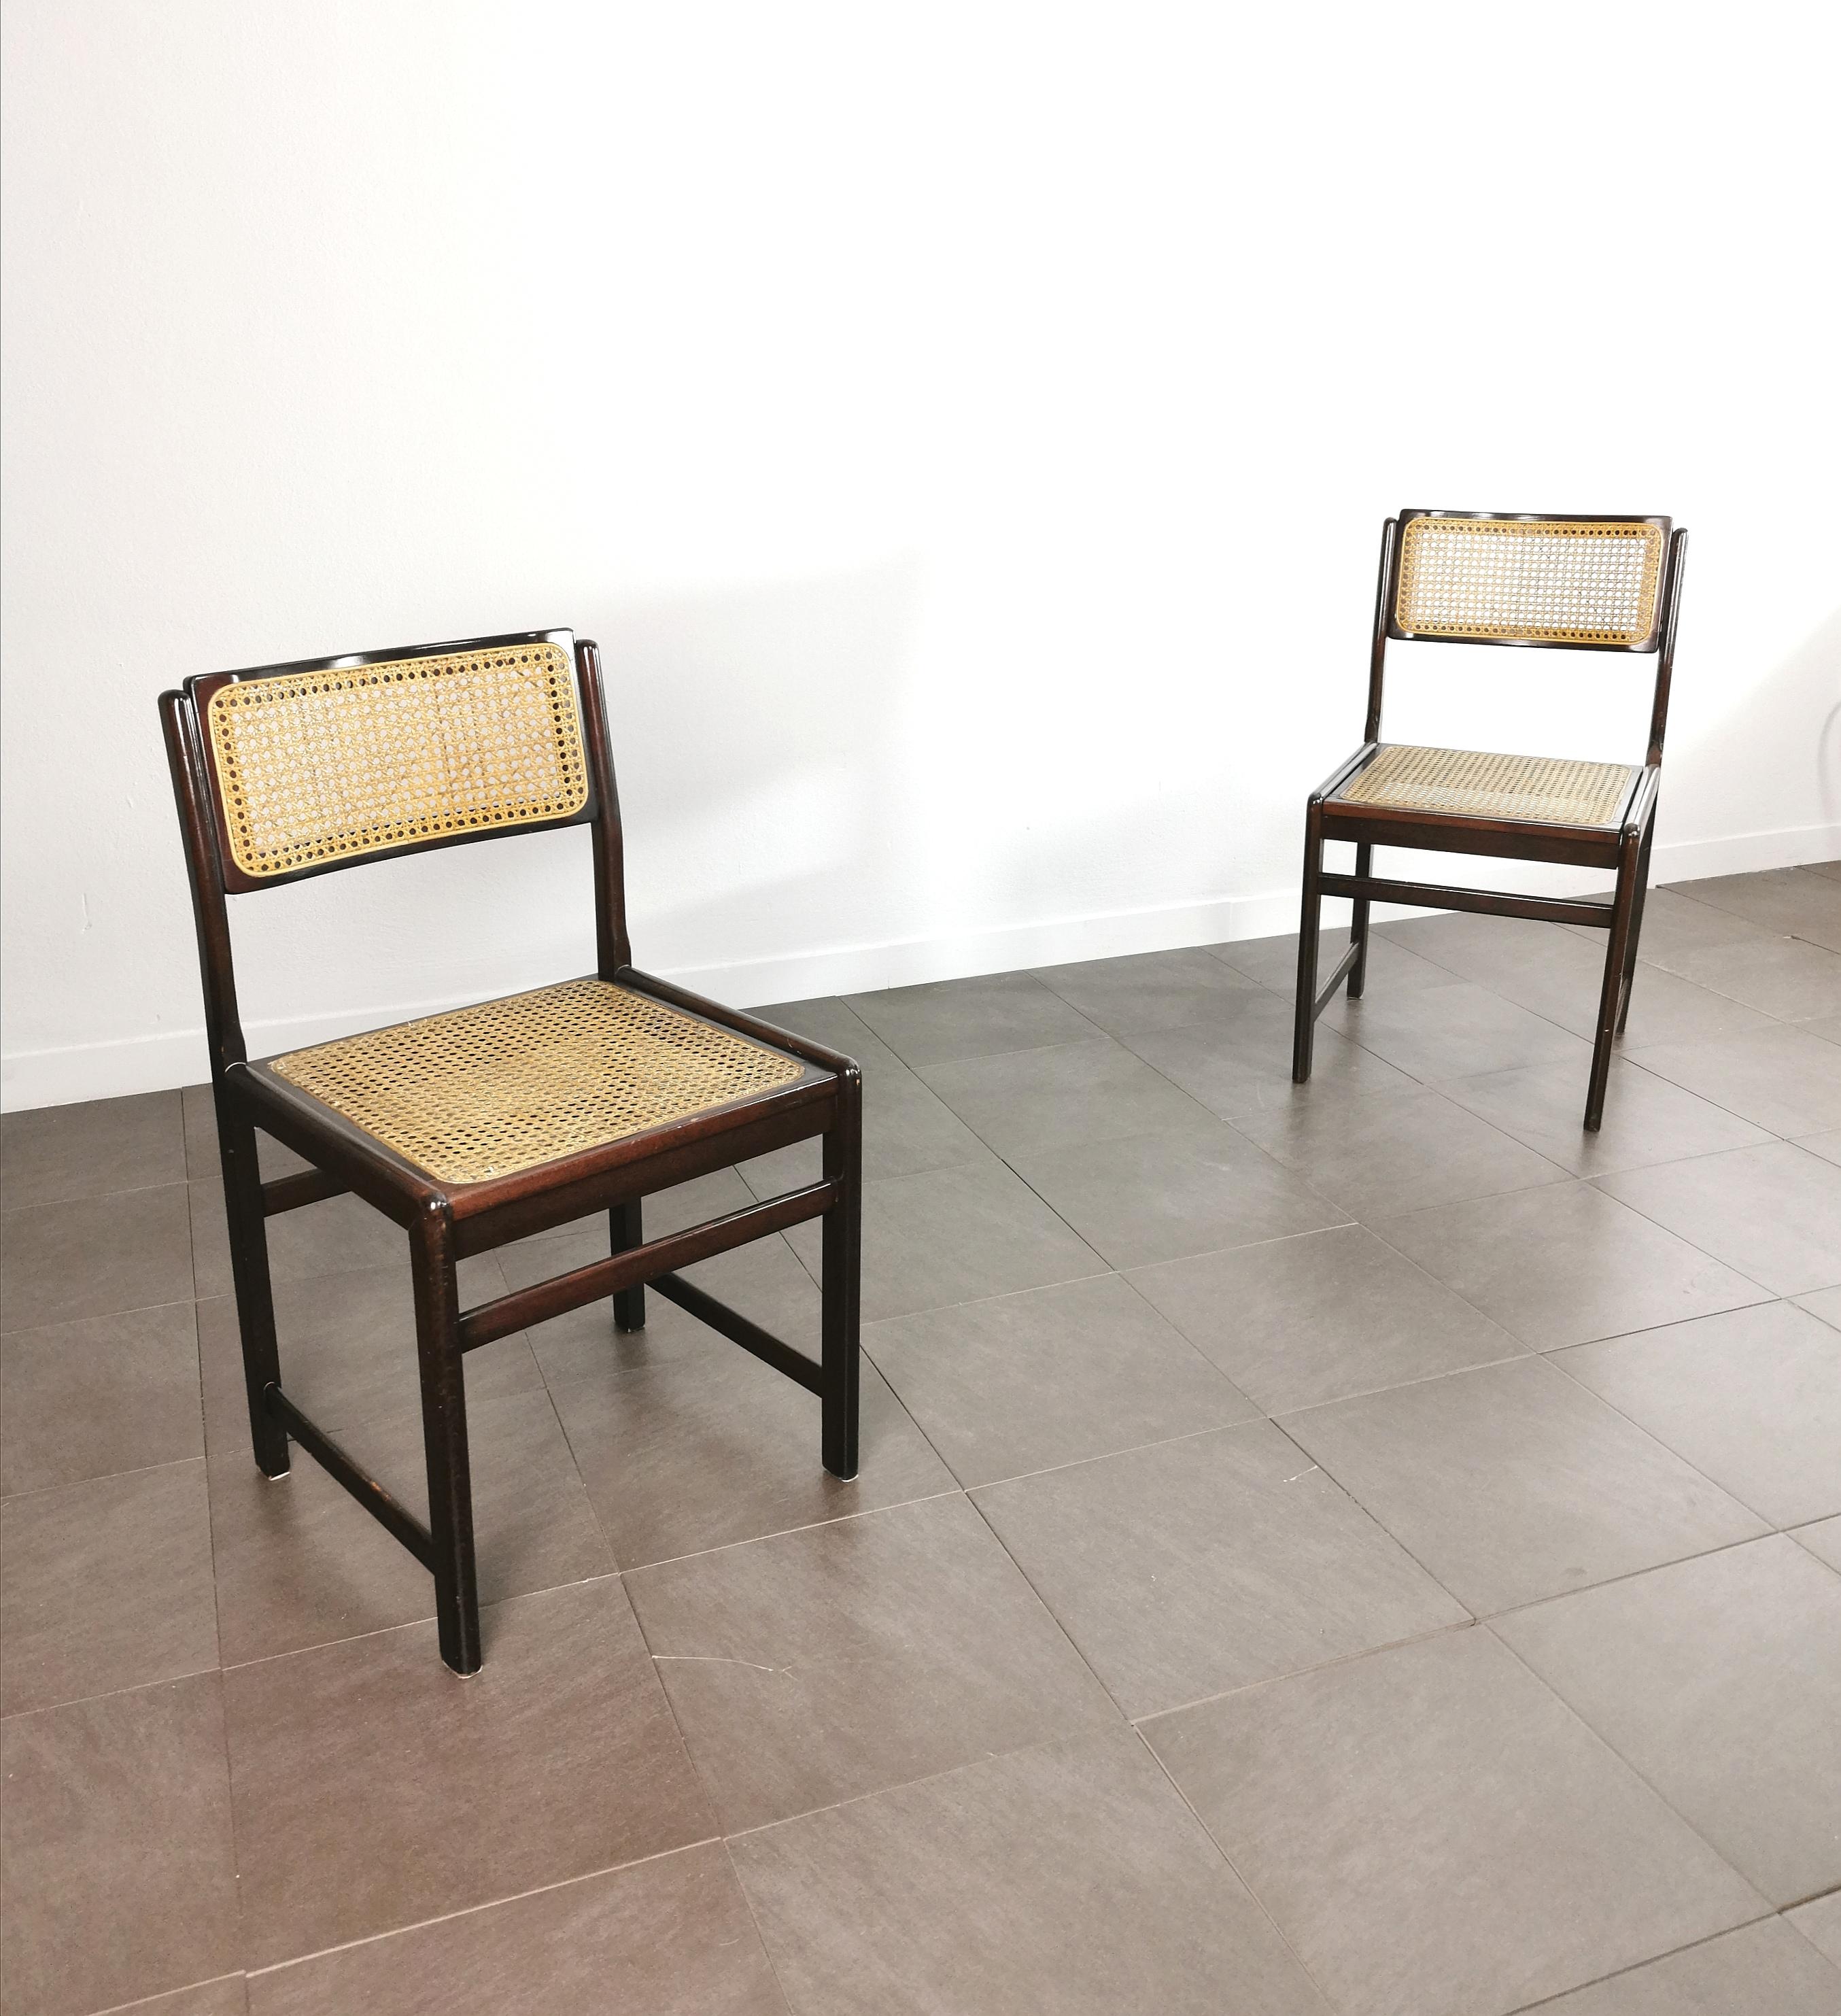 Seating Dining Chairs Wood Vienna Straw Midcentury Italian Design 1960s Set of 2 In Fair Condition For Sale In Palermo, IT